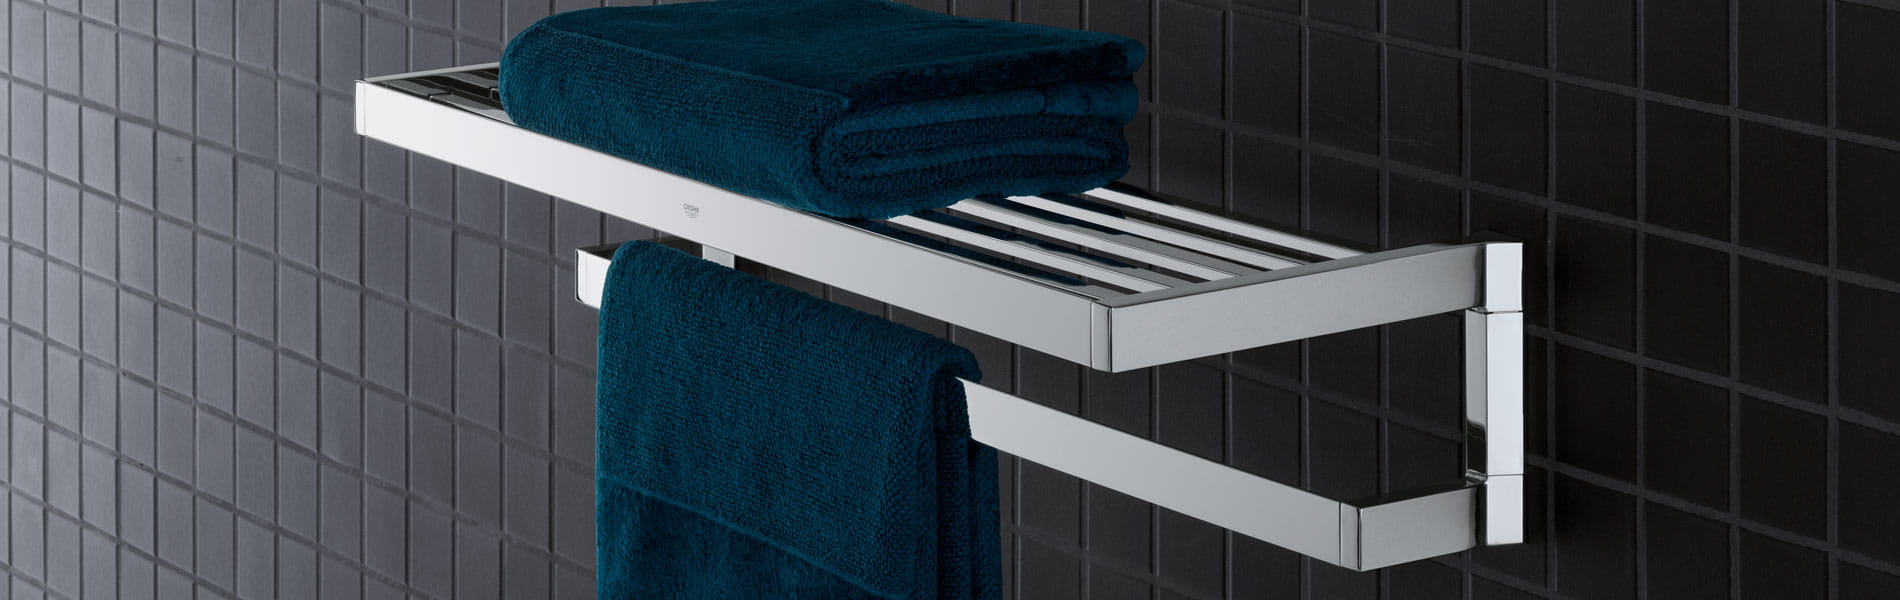 Selection cube towel rack on a black tiled wall.